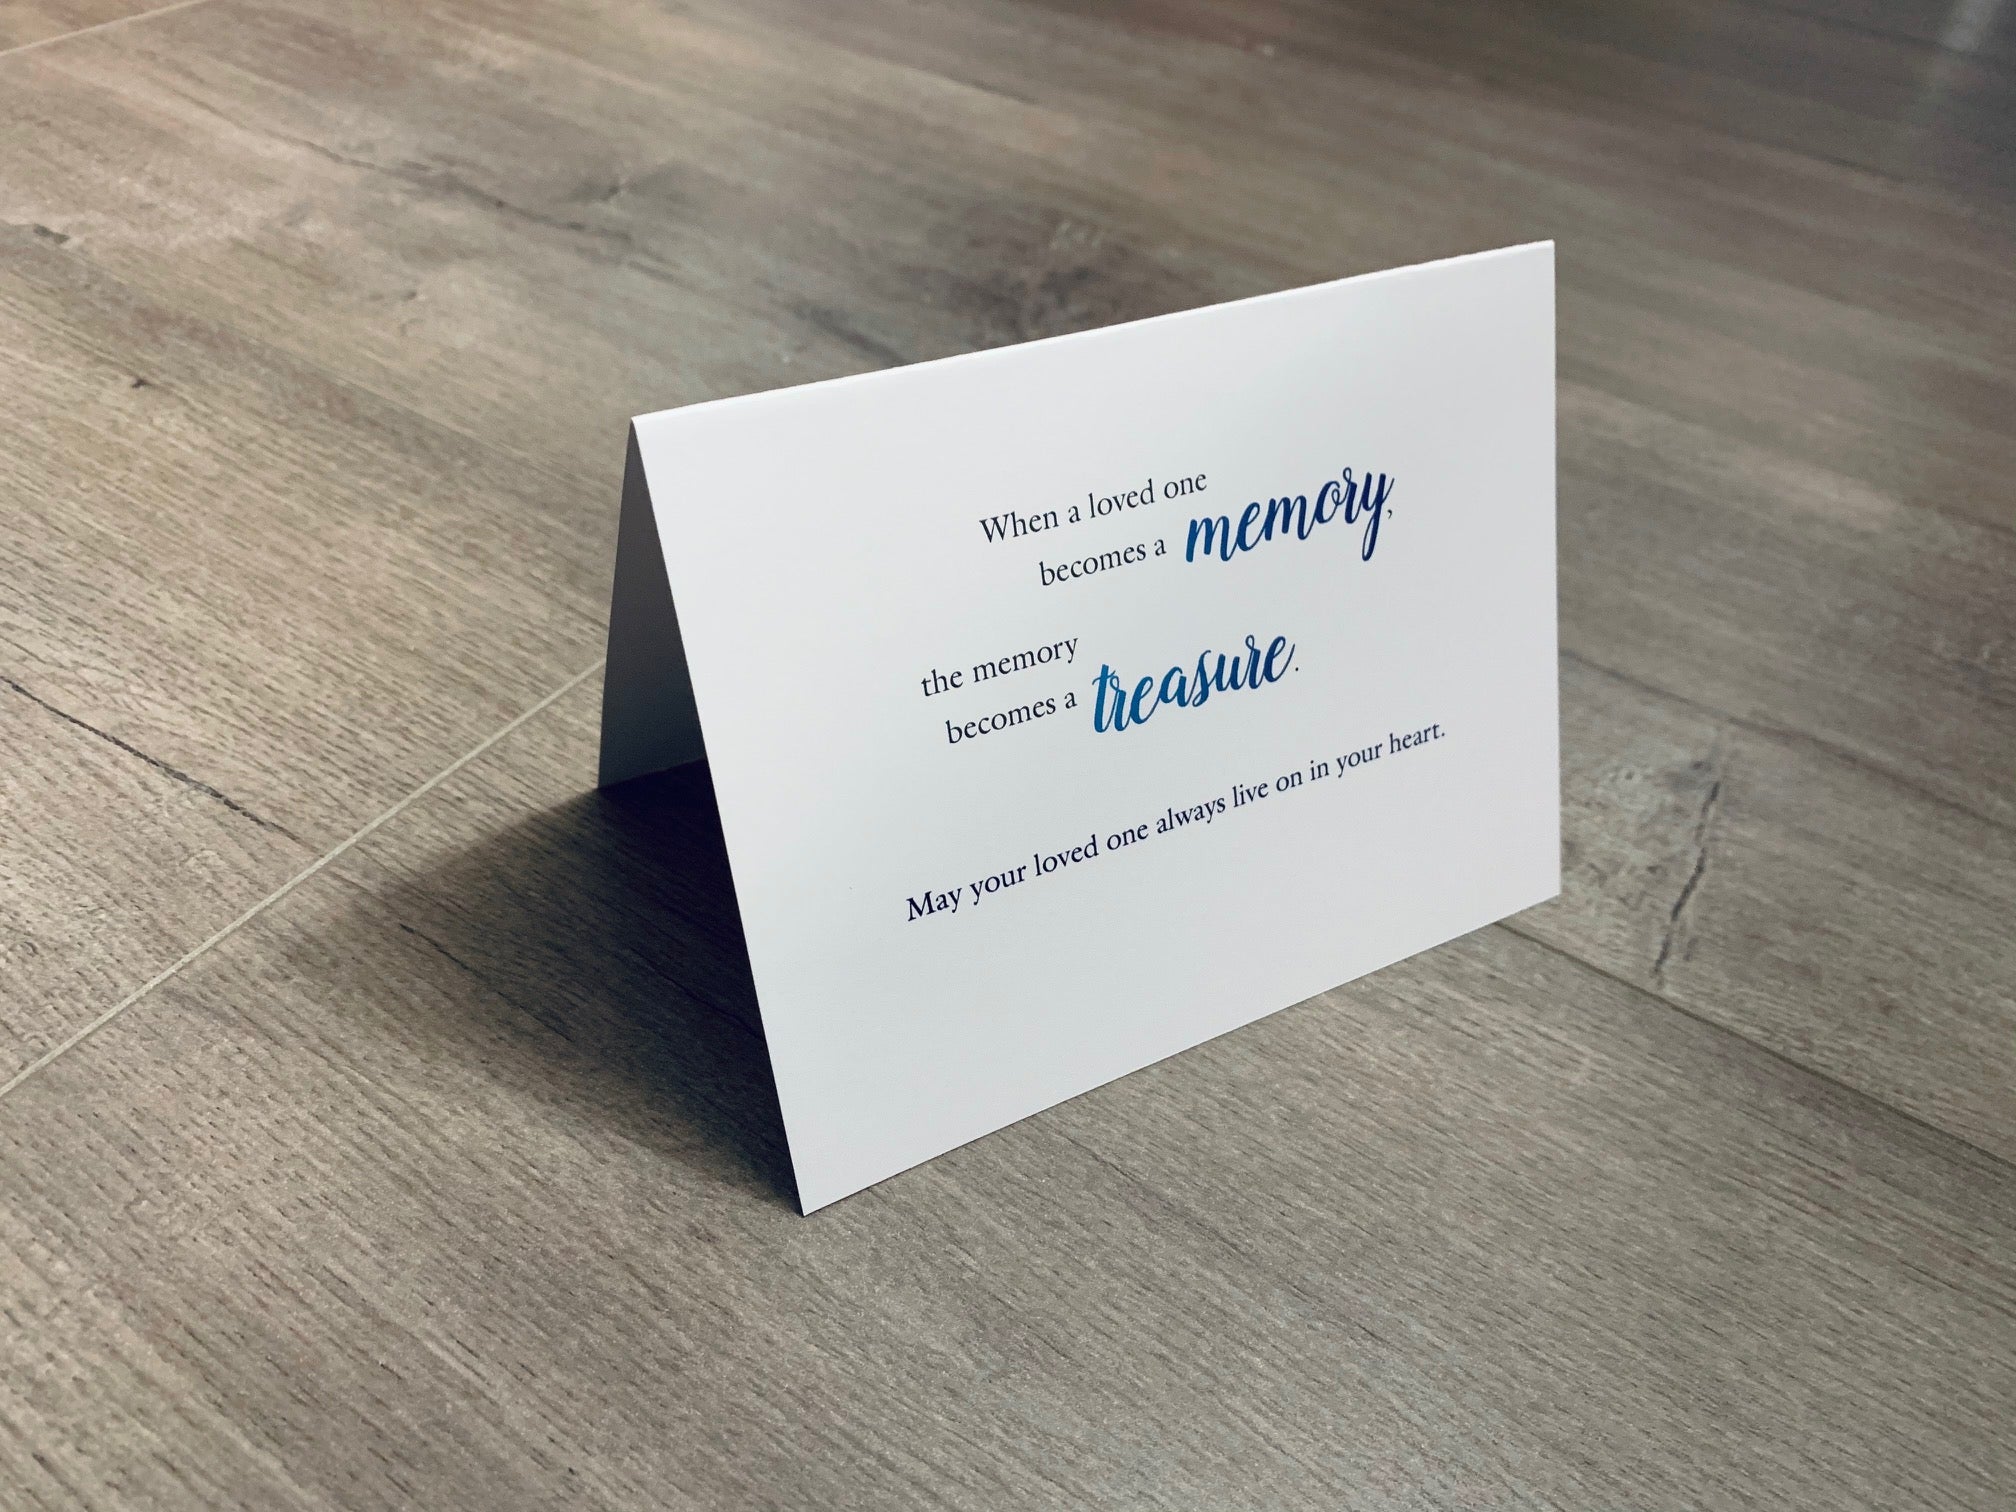 A white sympathy card is folded and propped up on a gray wooden floor. The card says, "When a loved one becomes a memory, the memory becomes a treasure. May your loved one always live on in your heart." In Sympathy Collection by Stationare.